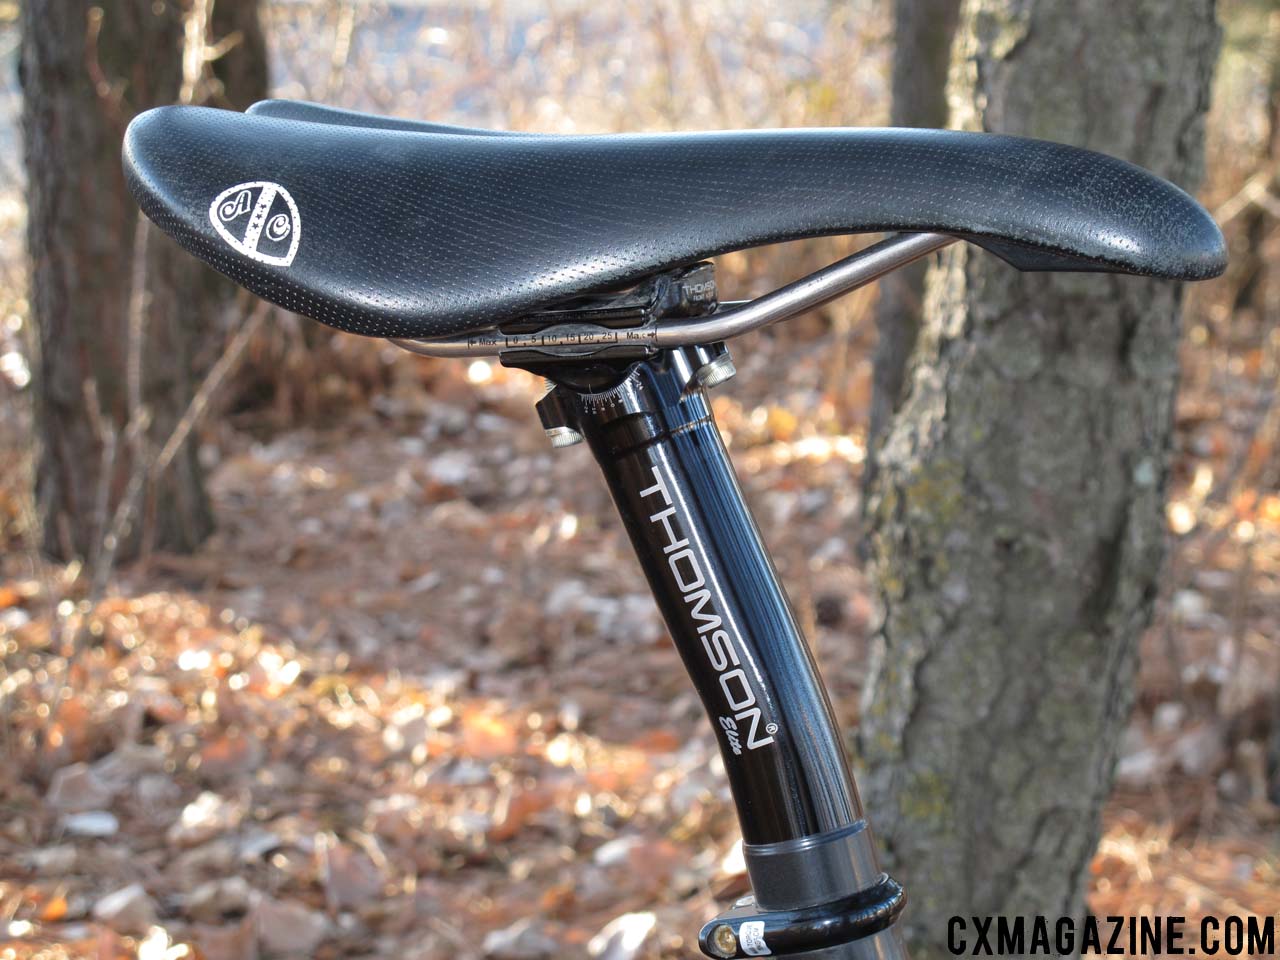 Fountain chooses a All City Gonzo saddle, mounted on a Thomson Elite seat post.